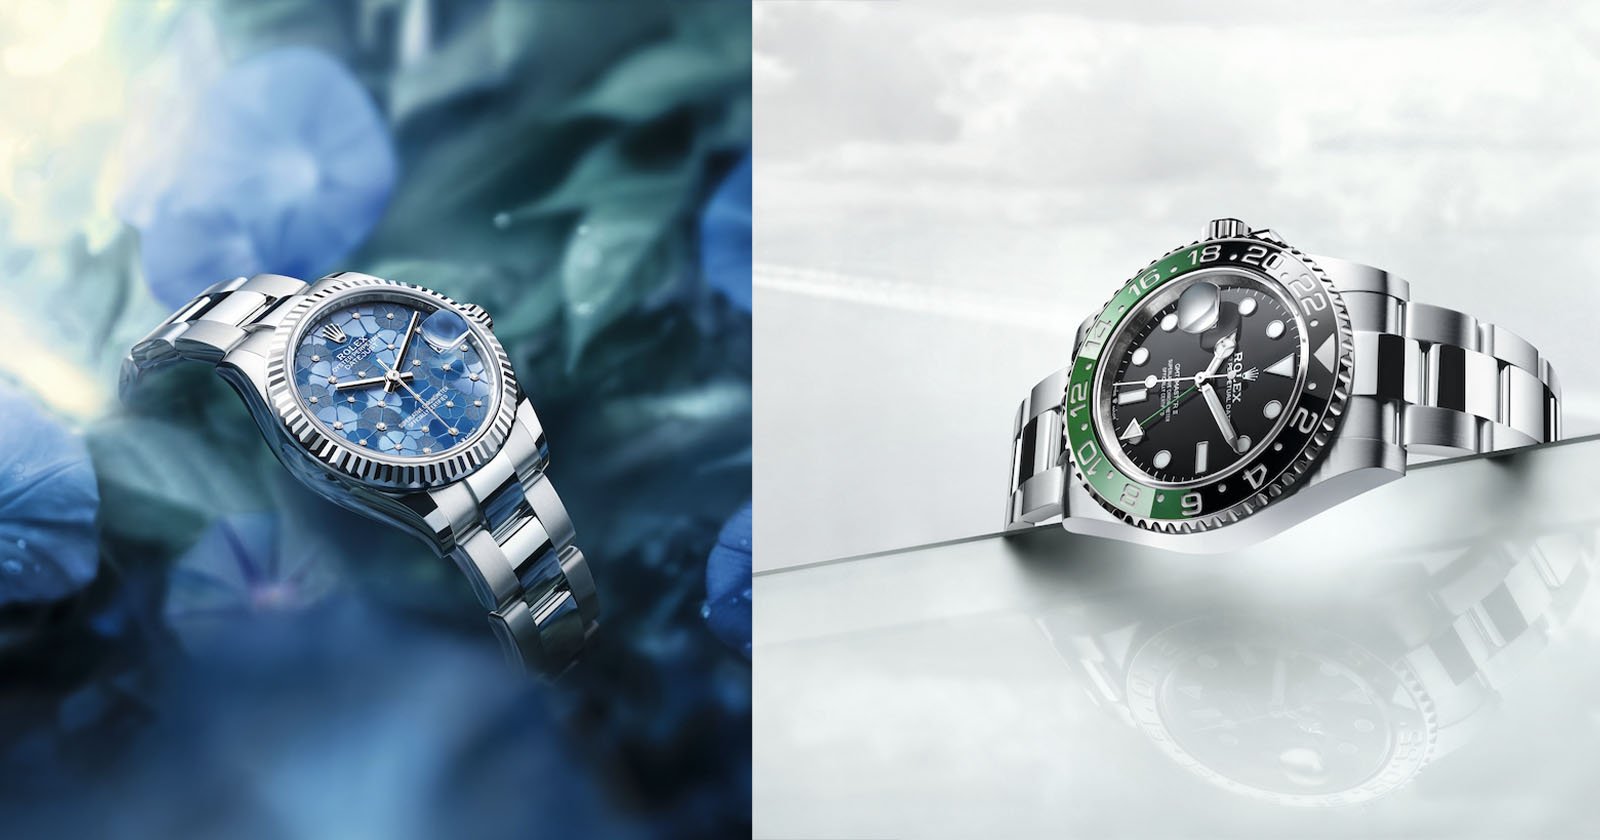 The Science Behind Why Watches are Set to 10:10 in Advertising Photos